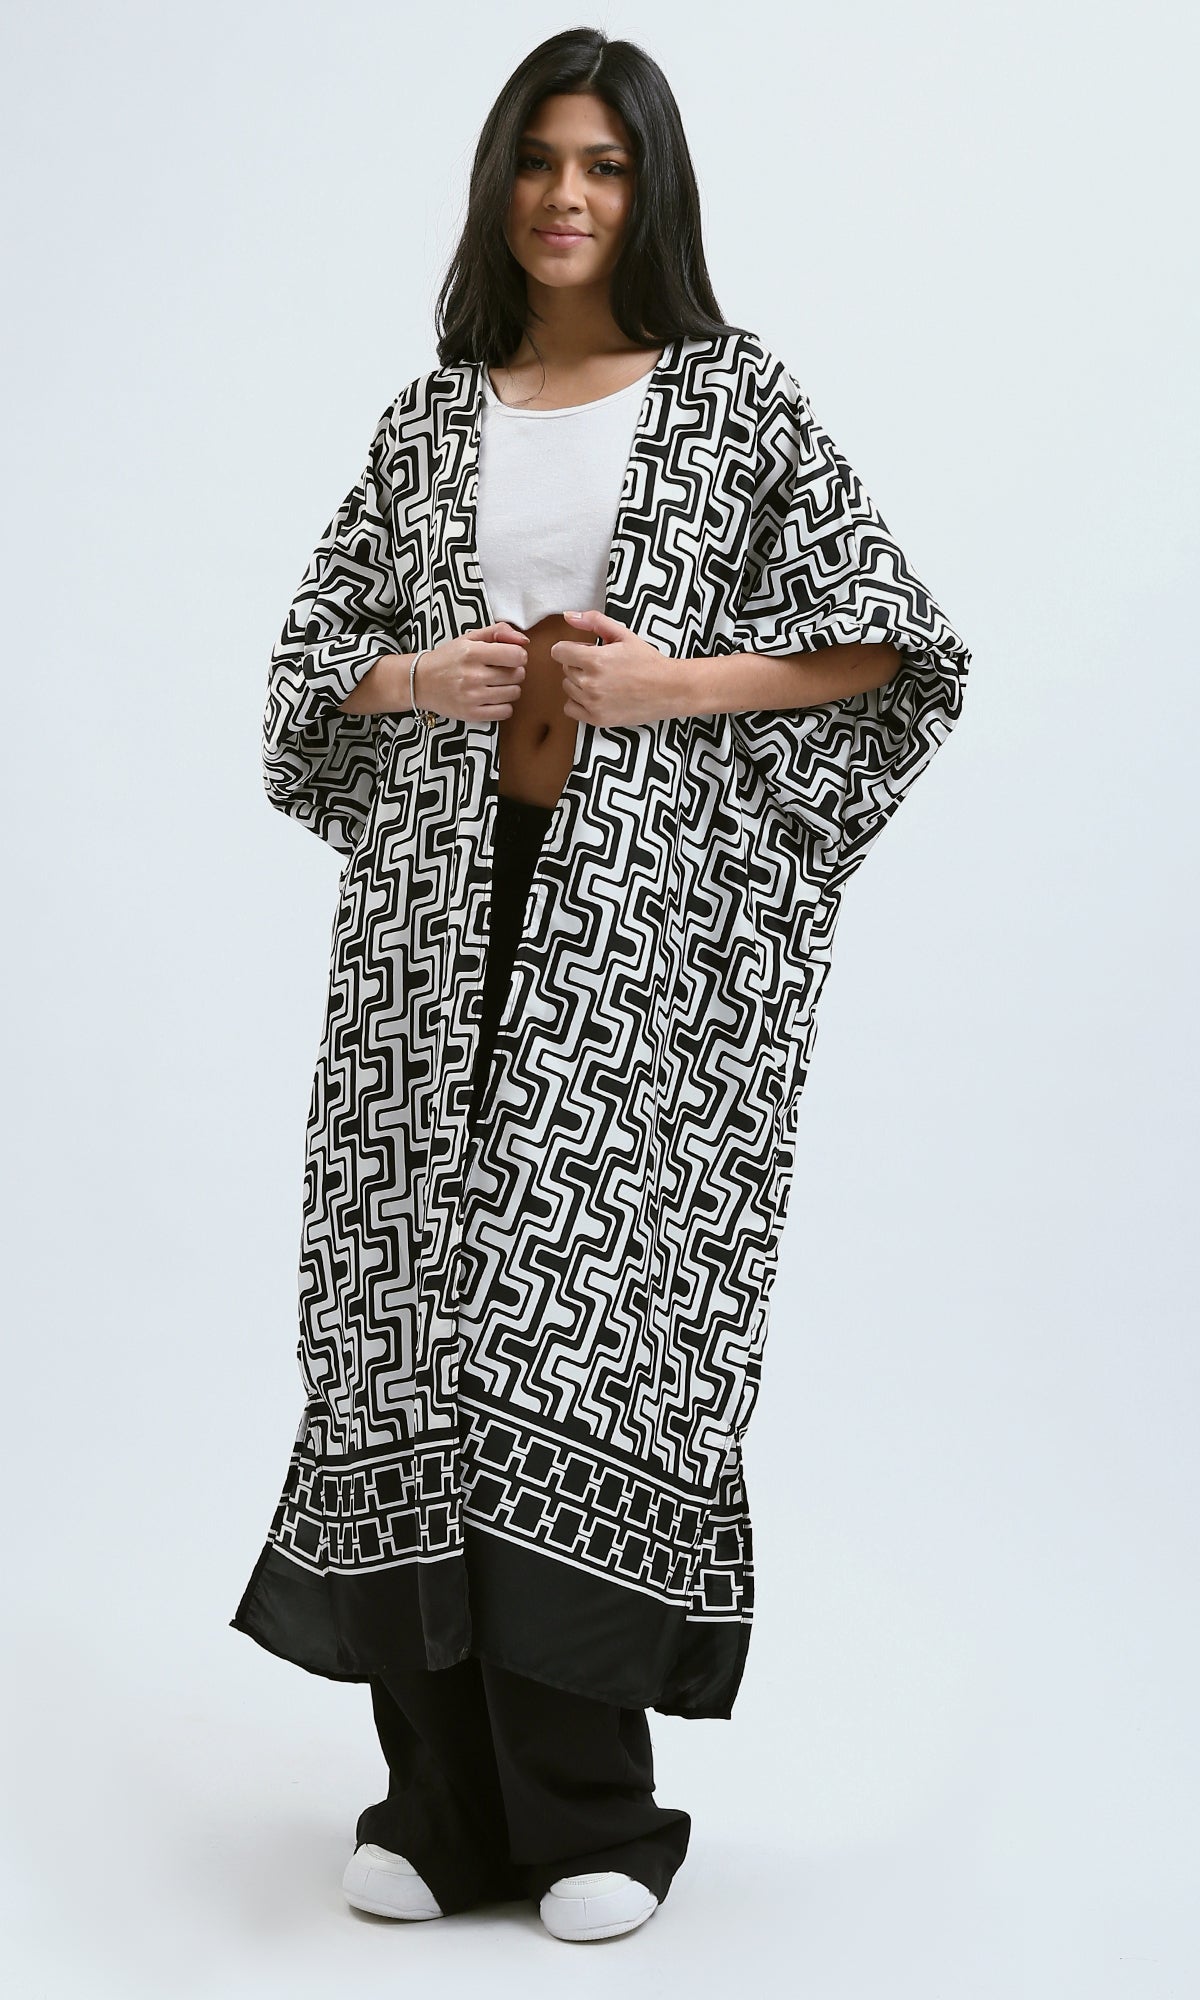 O189725 Patterned Slip On Cardigan With Puffy Sleeves - Black & White